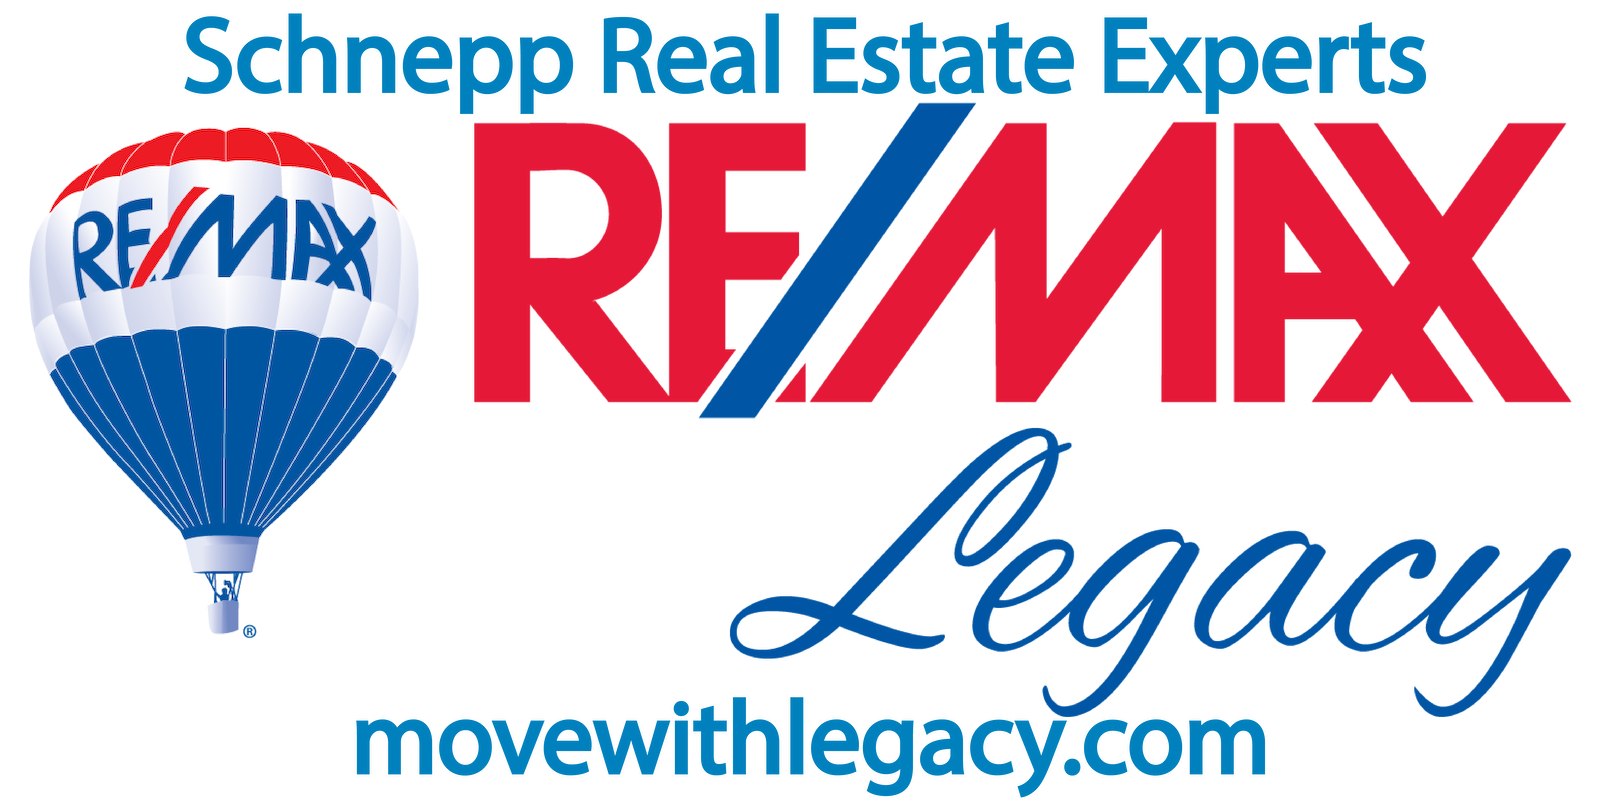 RE/MAX Legacy